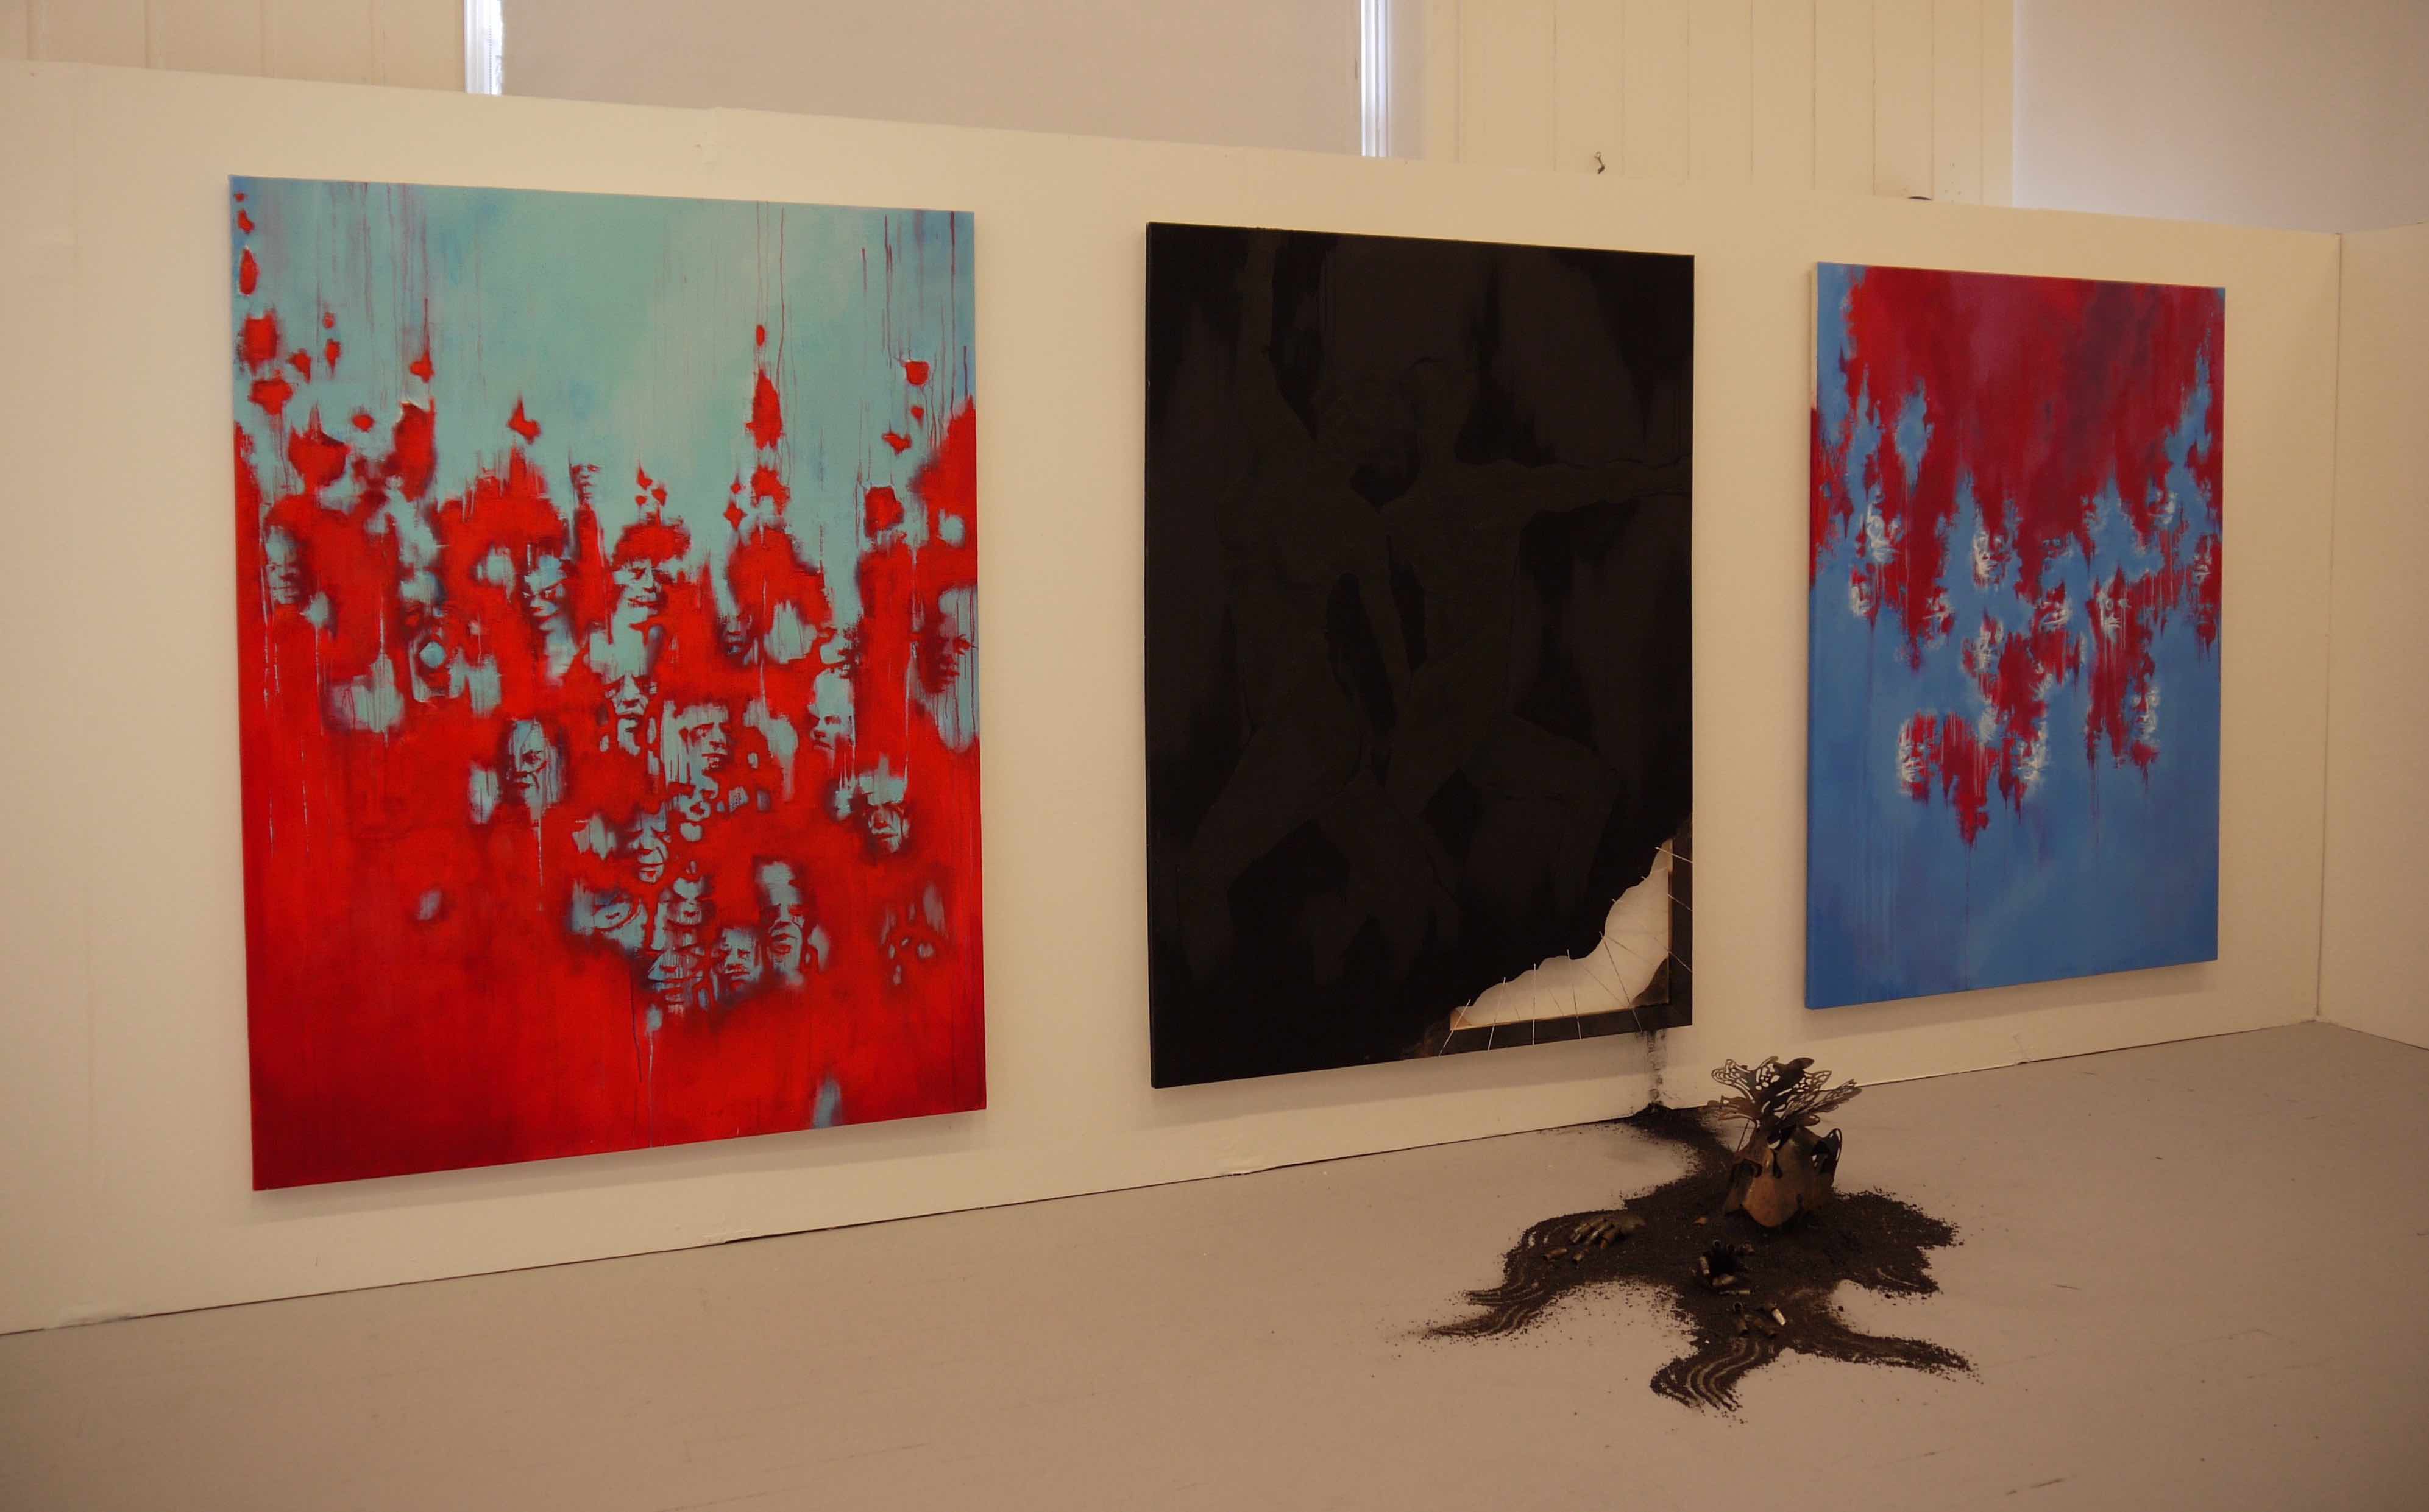 Three paintings with different colour schemes are installed from left to right. The central painting is entirely in black.. A sculpture is on the floor in front of the central black painting.